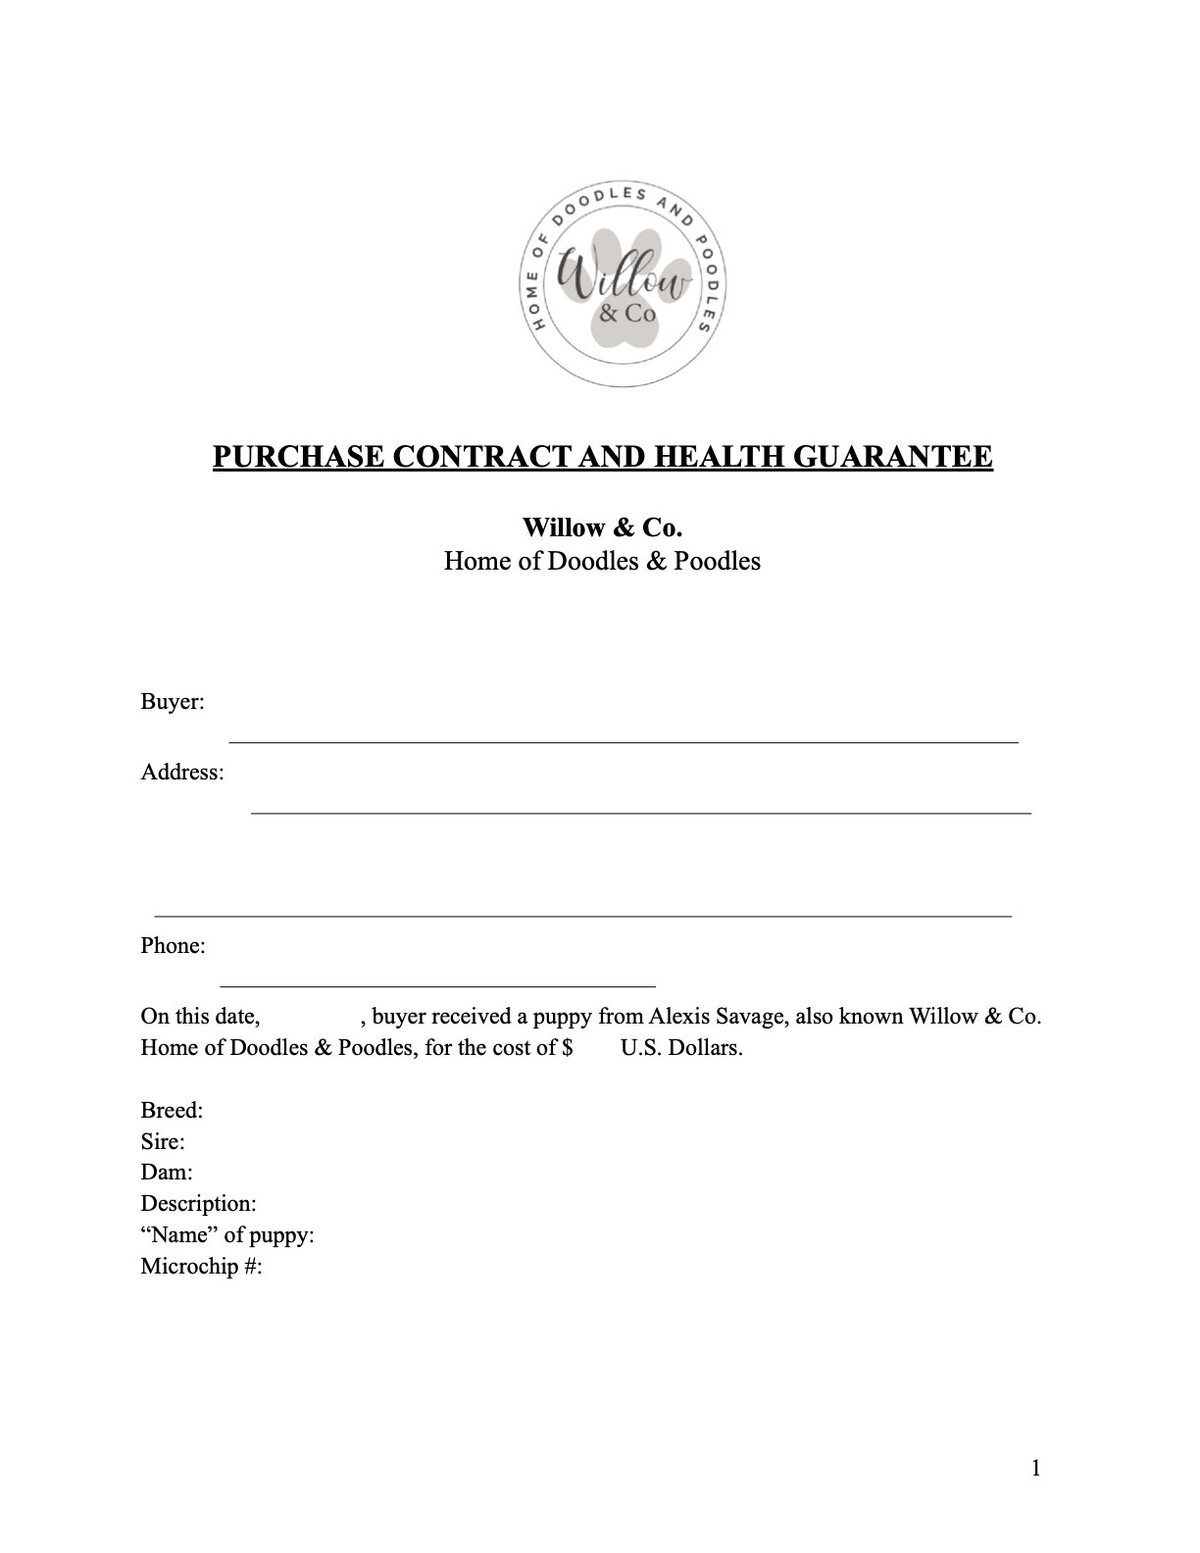 W&C.PURCHASE CONTRACT AND HEALTH GUARANTEE.1